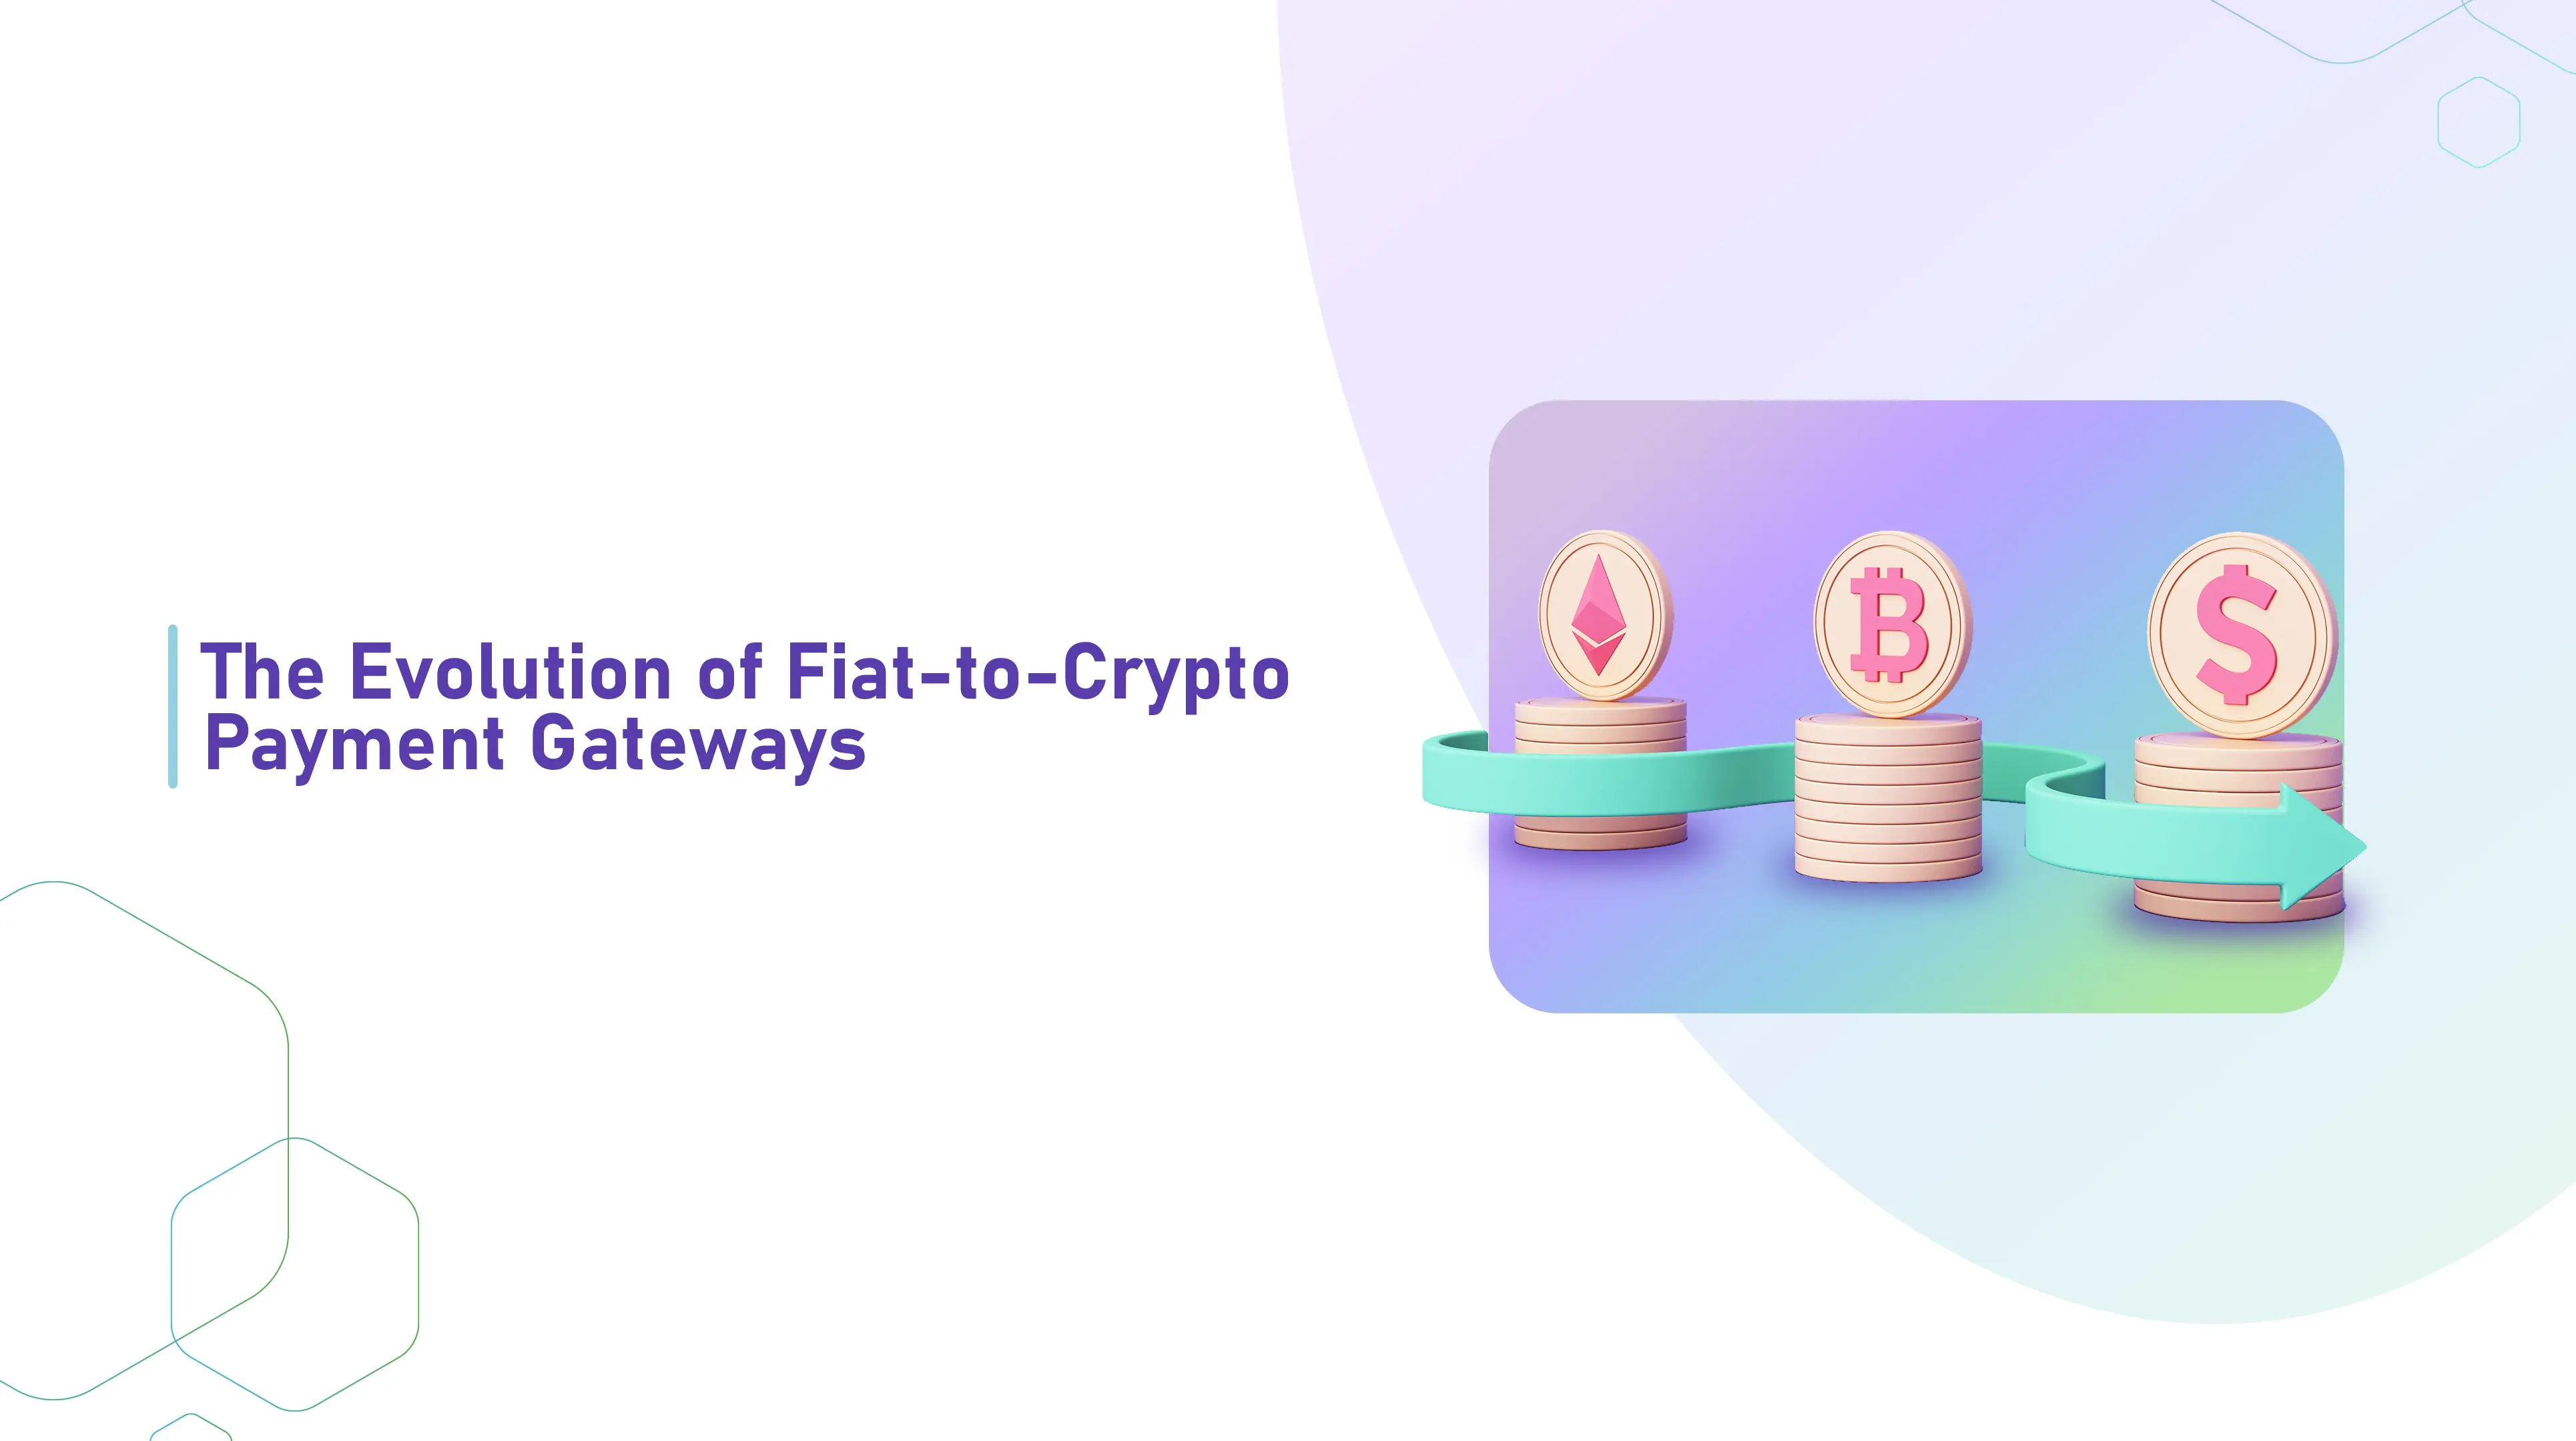 The Evolution of Fiat-to-Crypto Payment Gateways